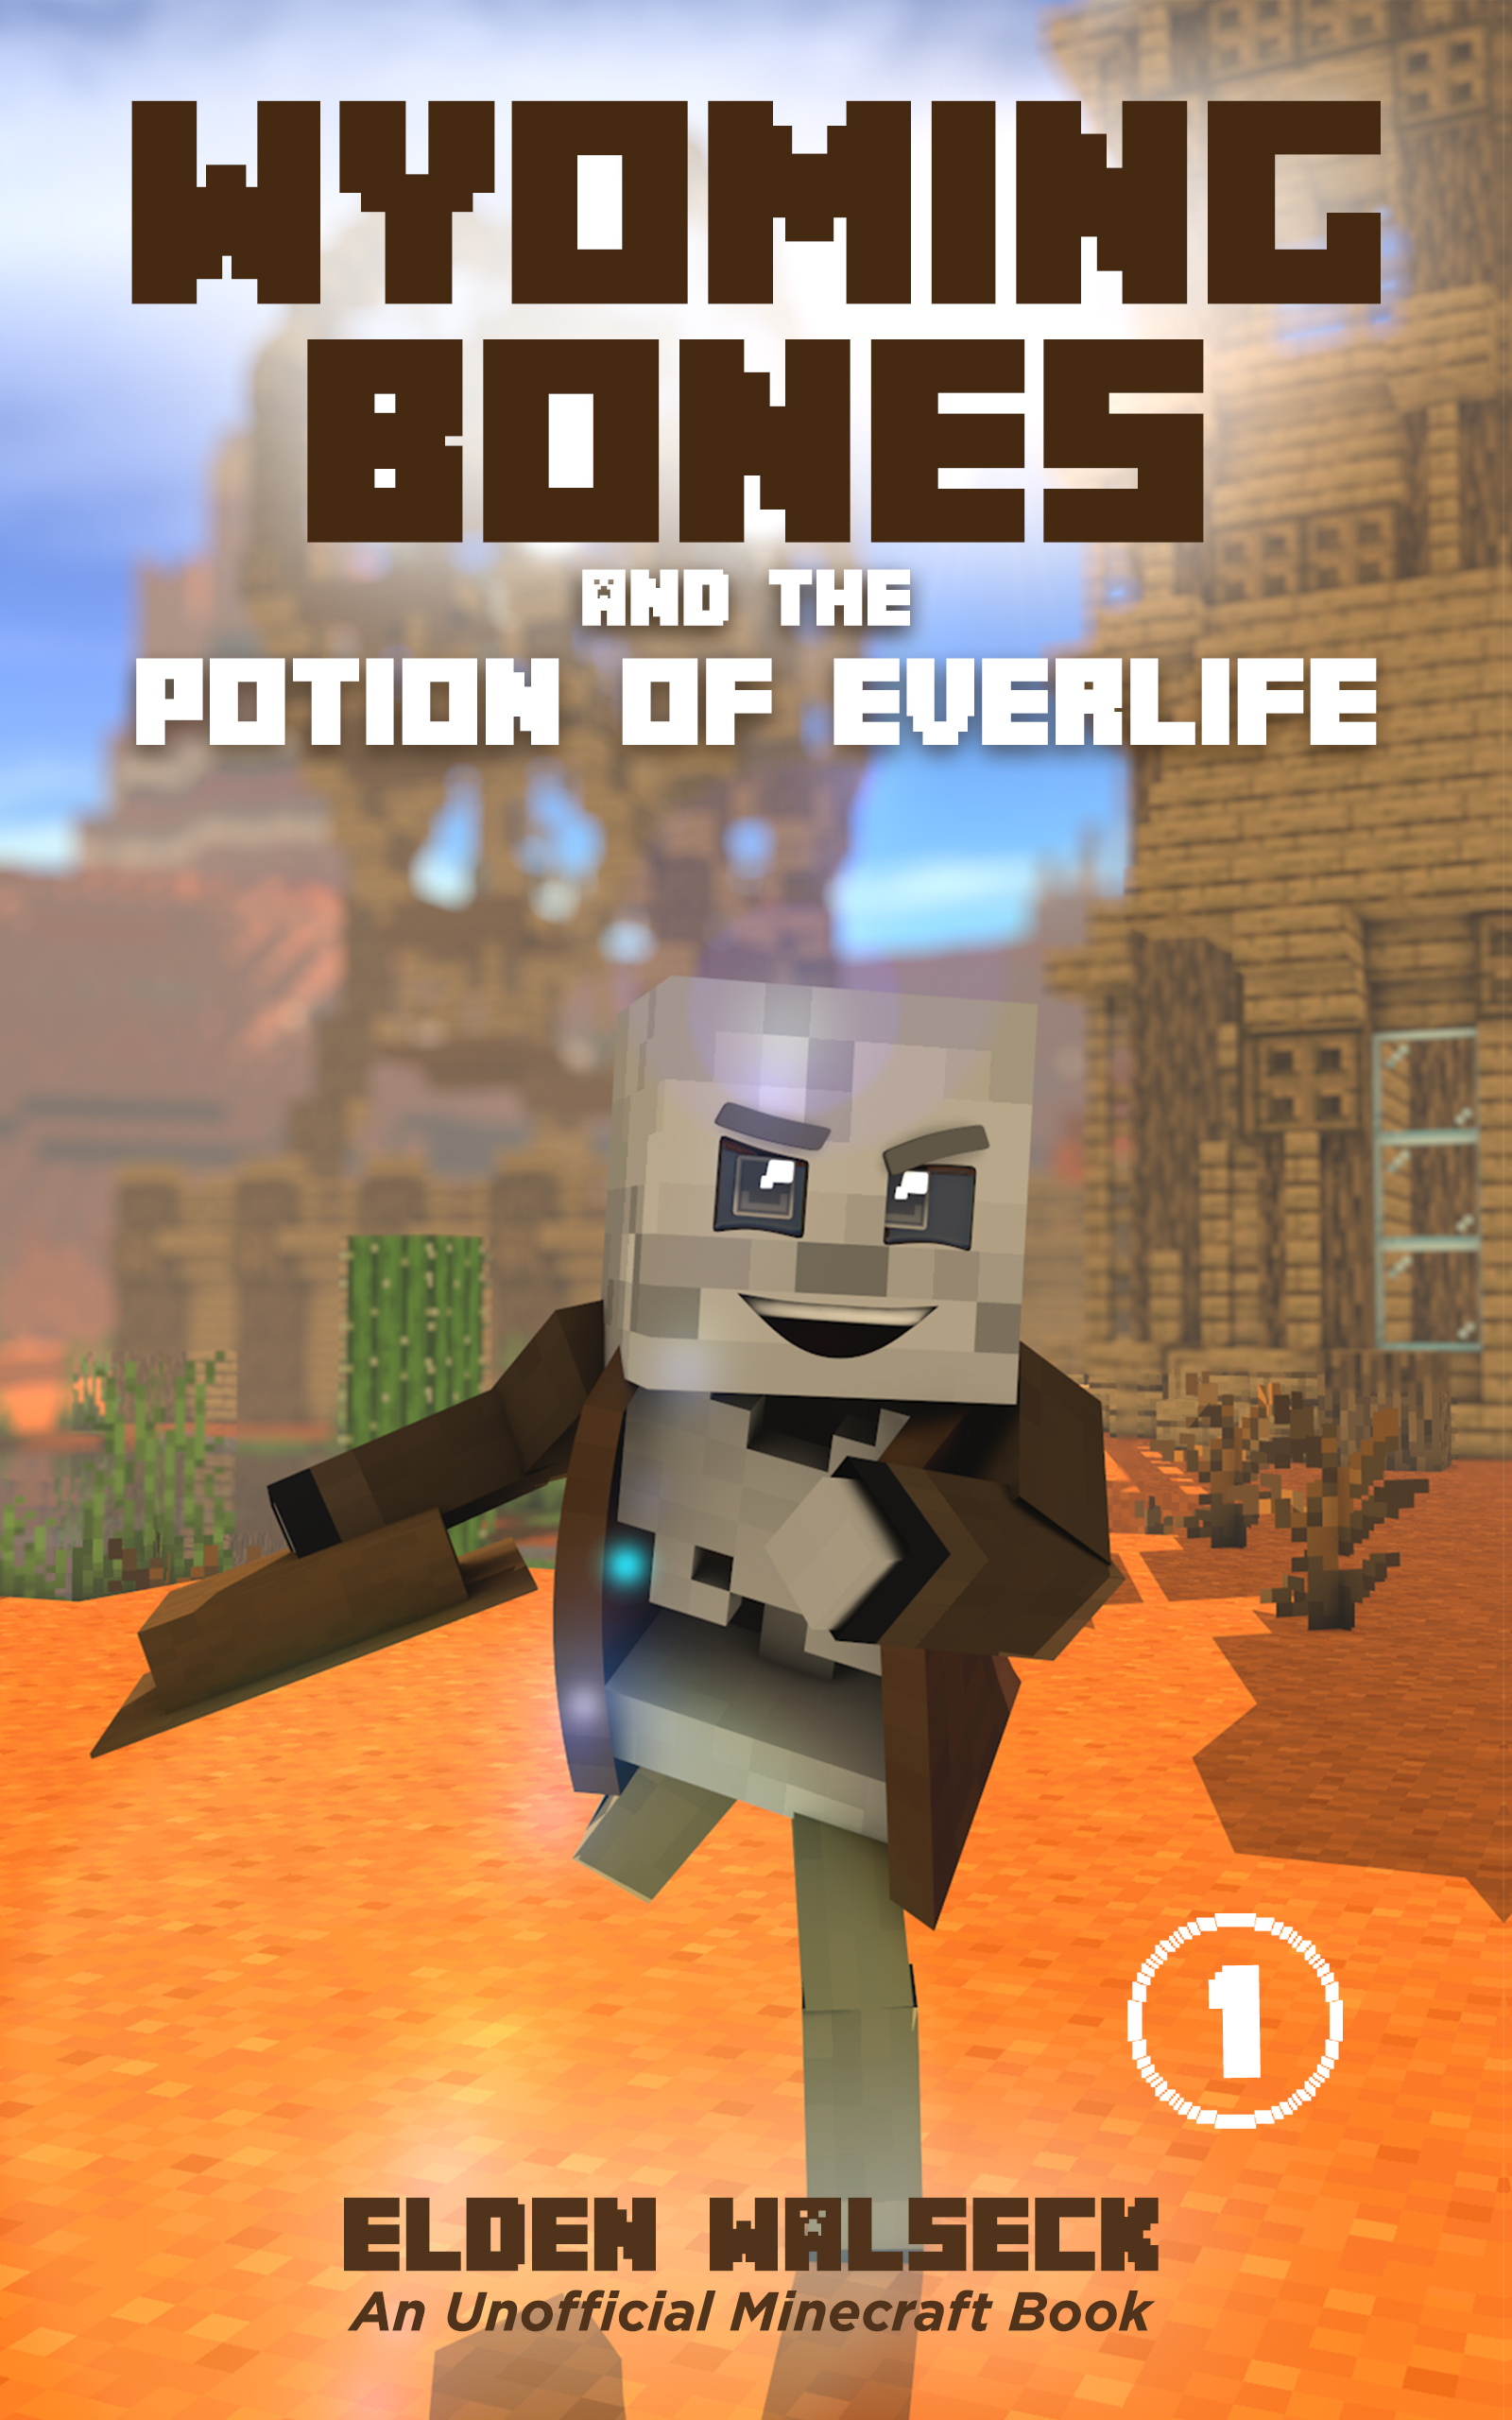 FREE: Wyoming Bones and the Potion of Everlife by Elden Walseck